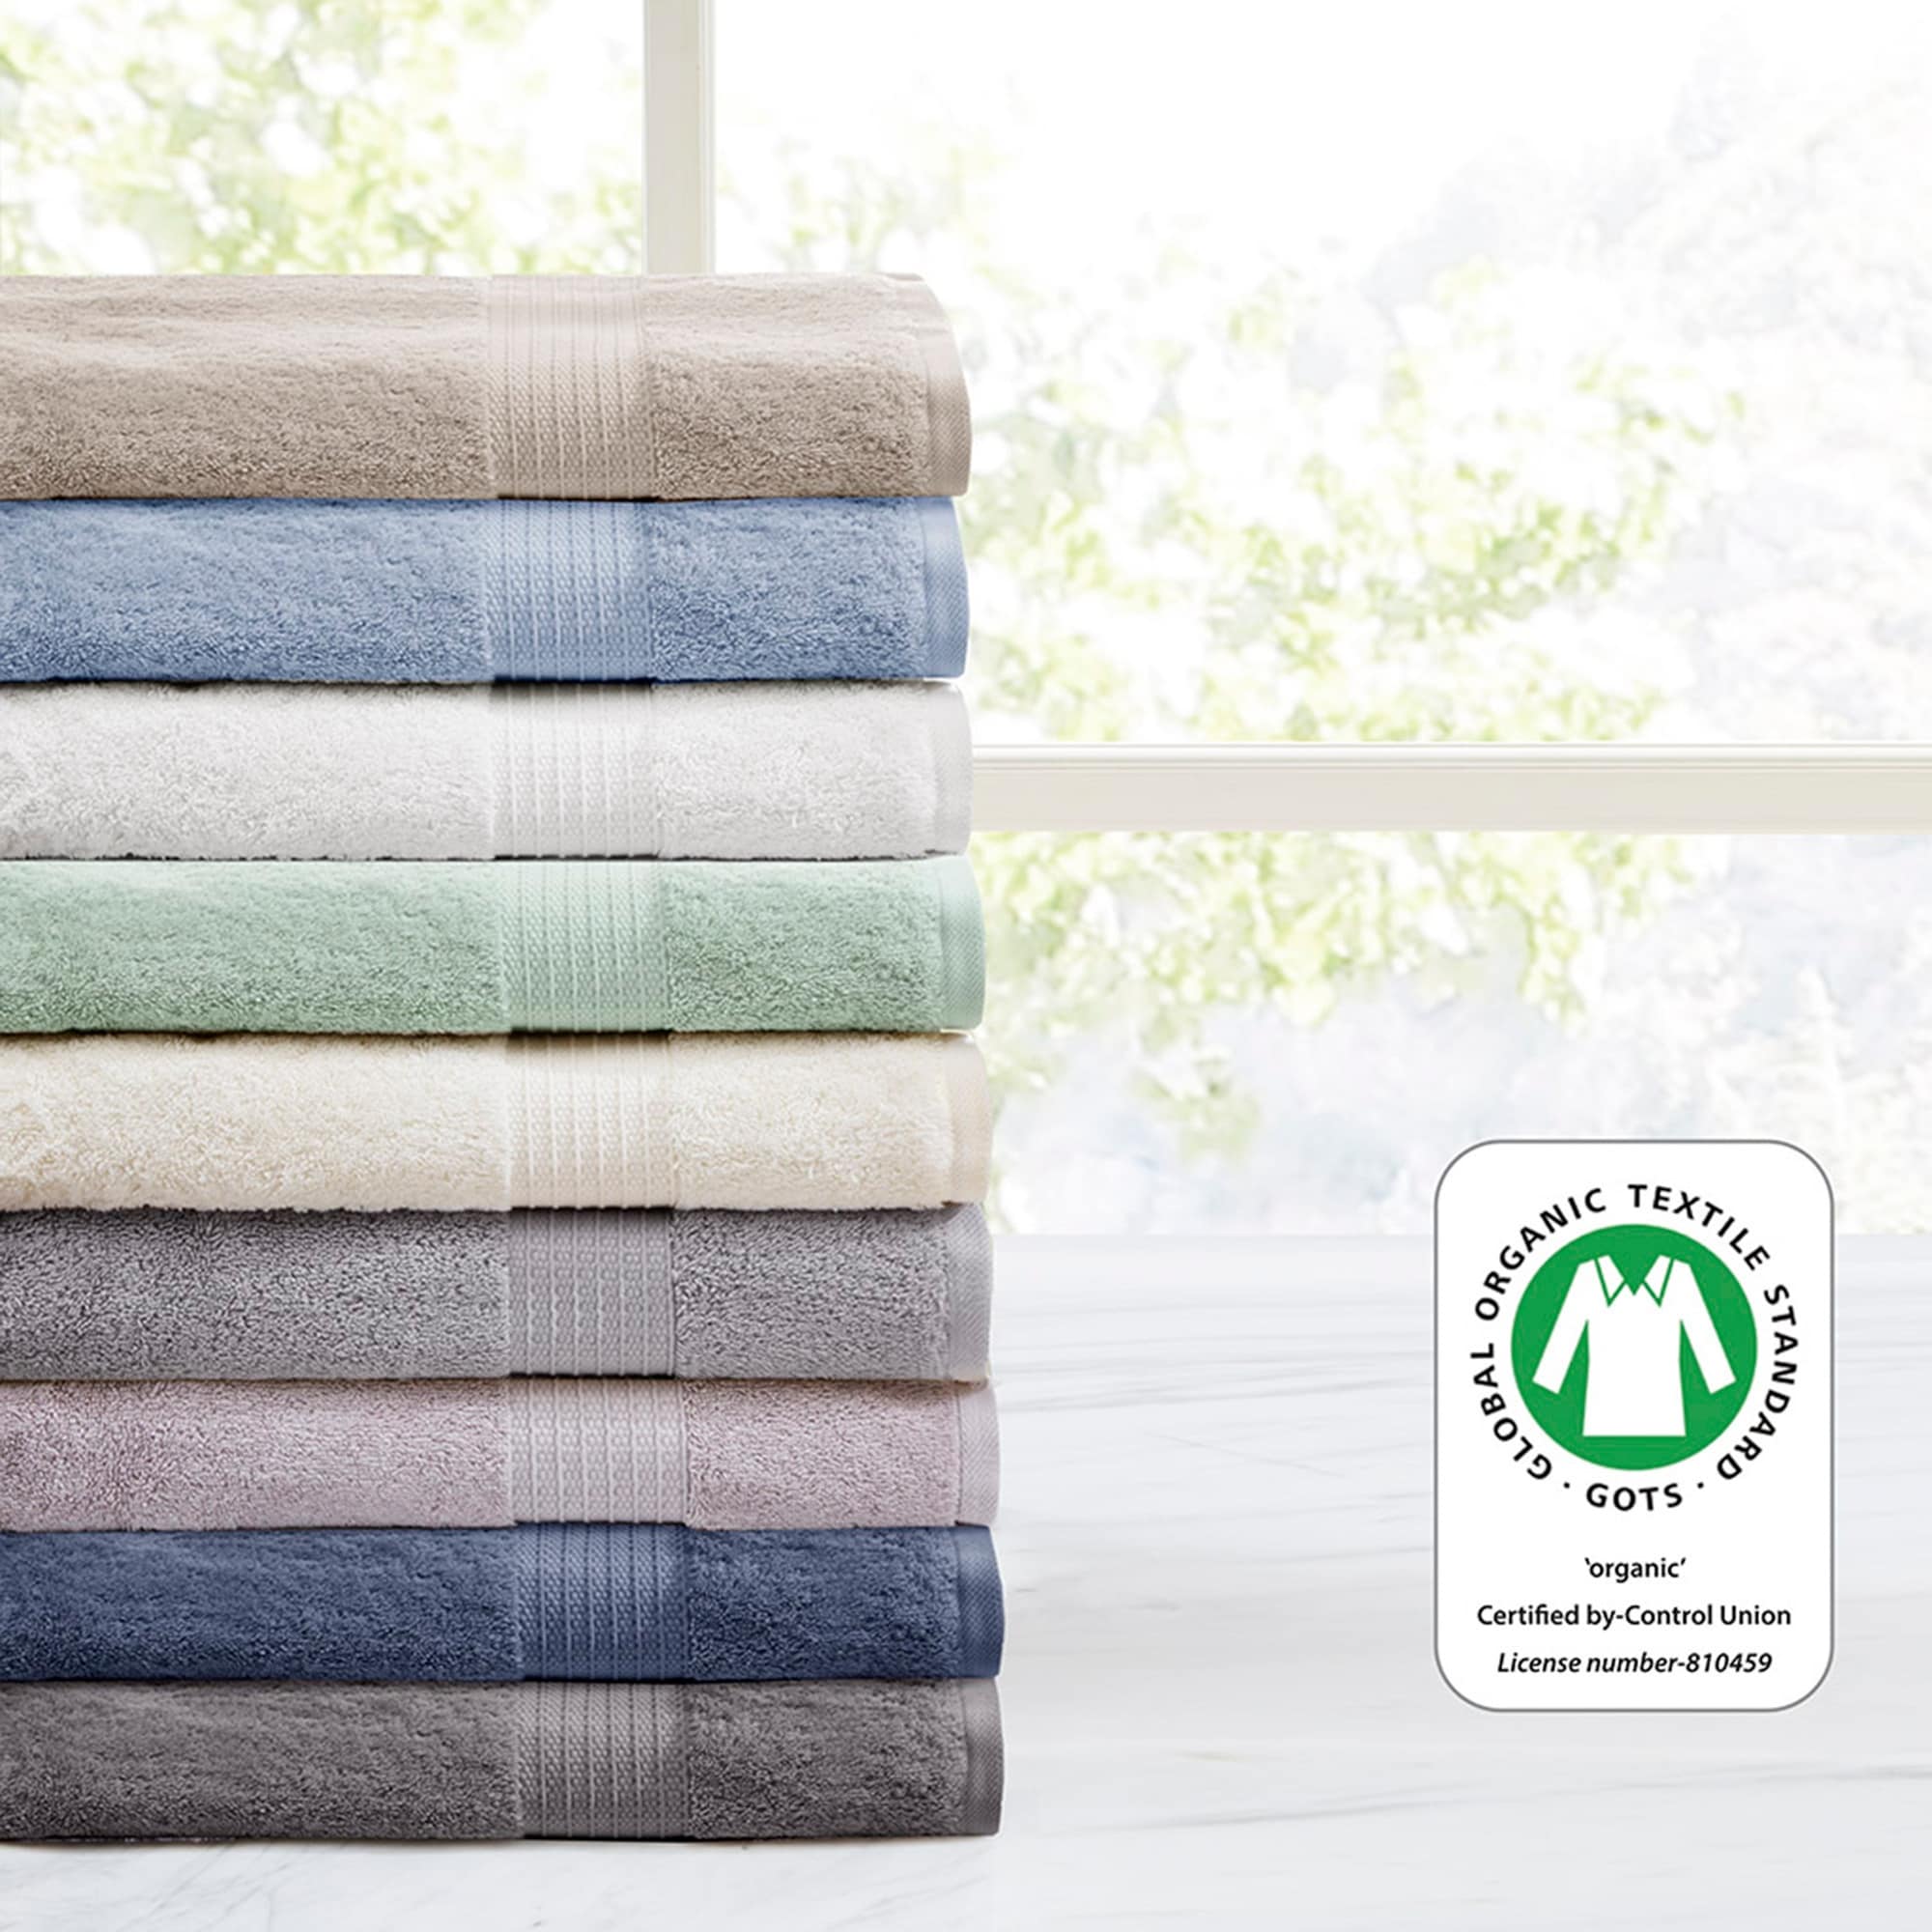 https://ak1.ostkcdn.com/images/products/is/images/direct/2b225b770d607989776f3683df523adef304788a/Madison-Park-Organic-6-Piece-Cotton-Towel-Set.jpg